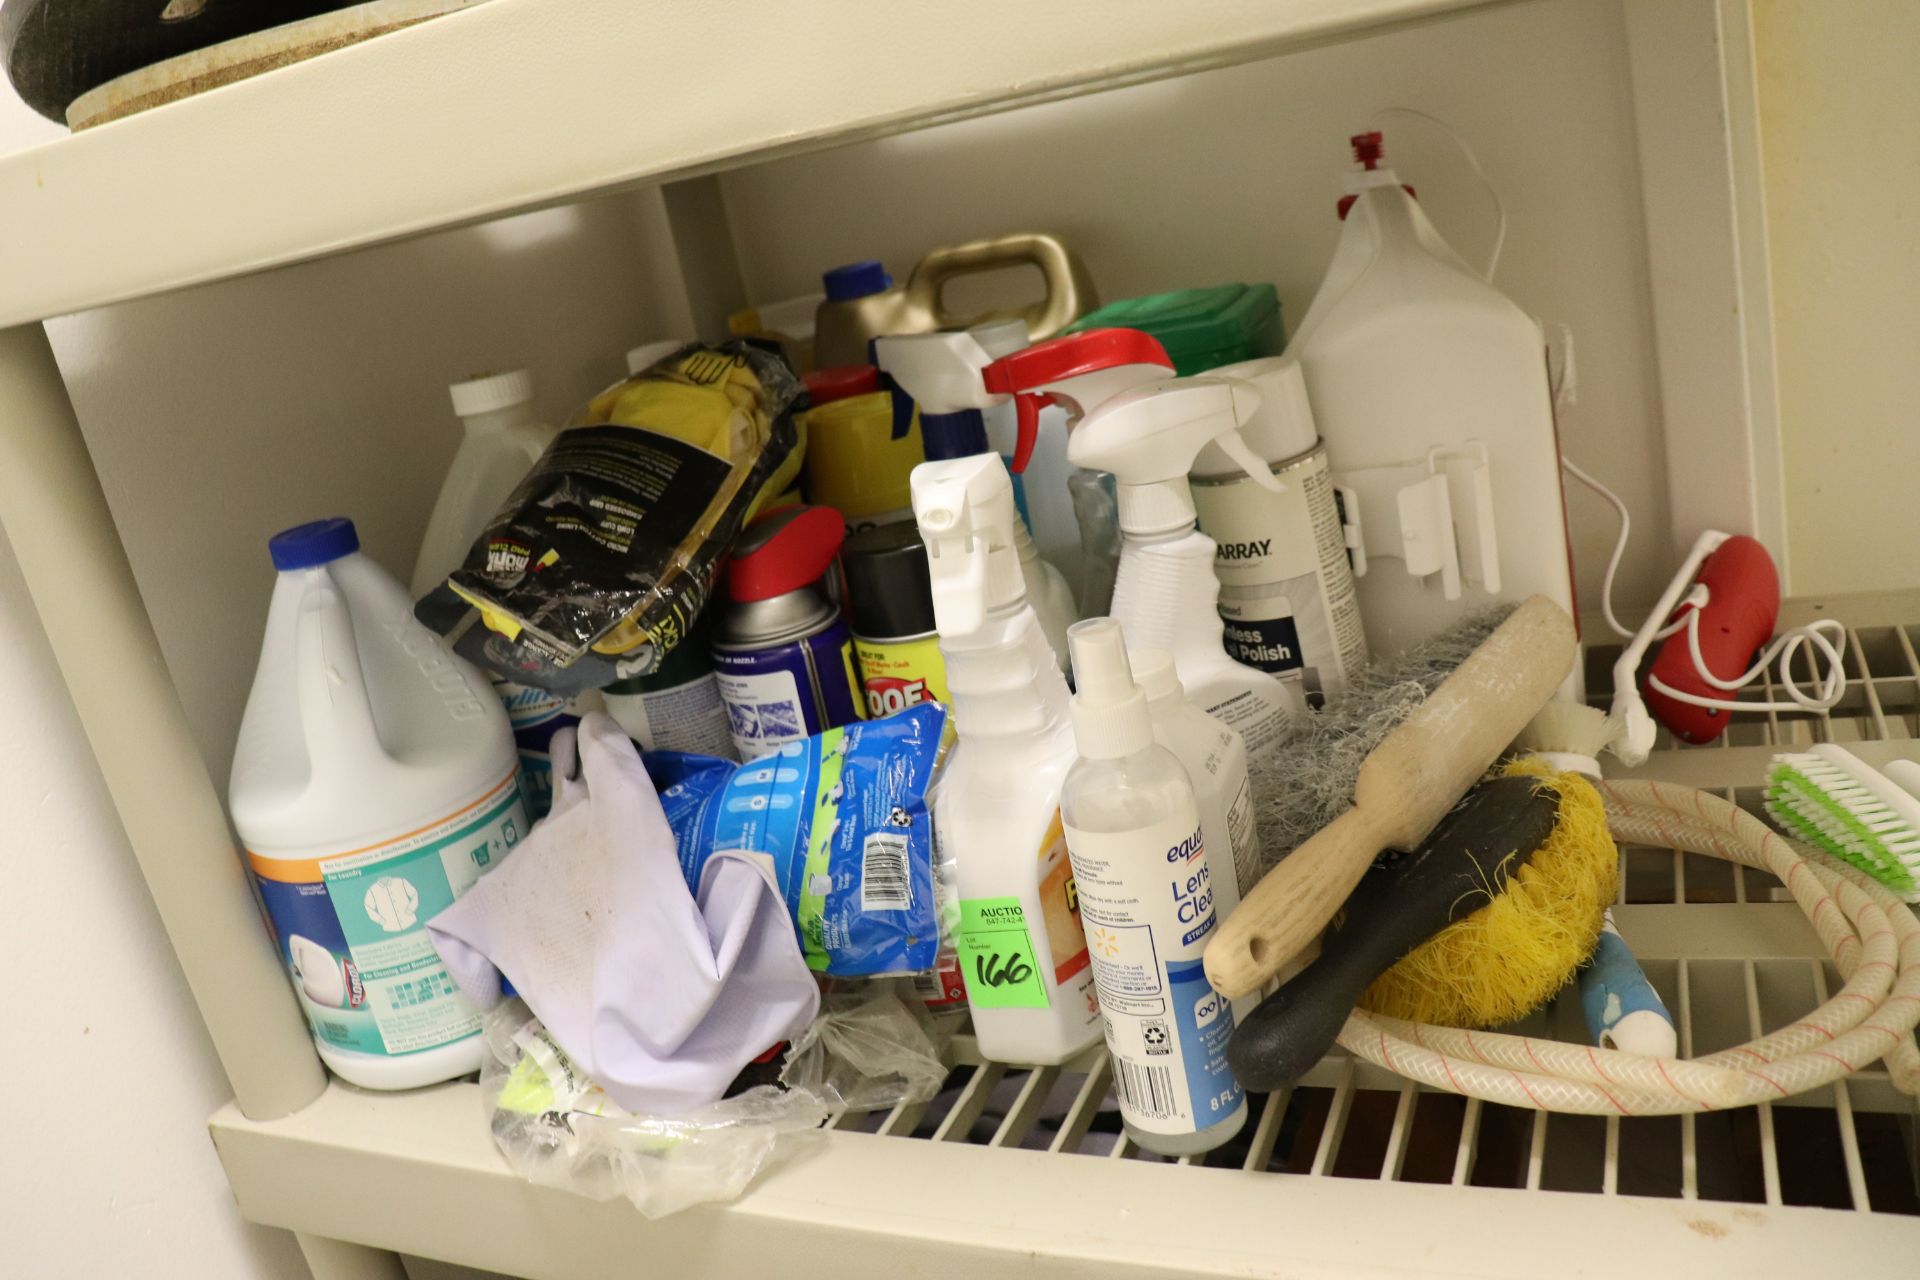 Miscellaneous cleaning supplies